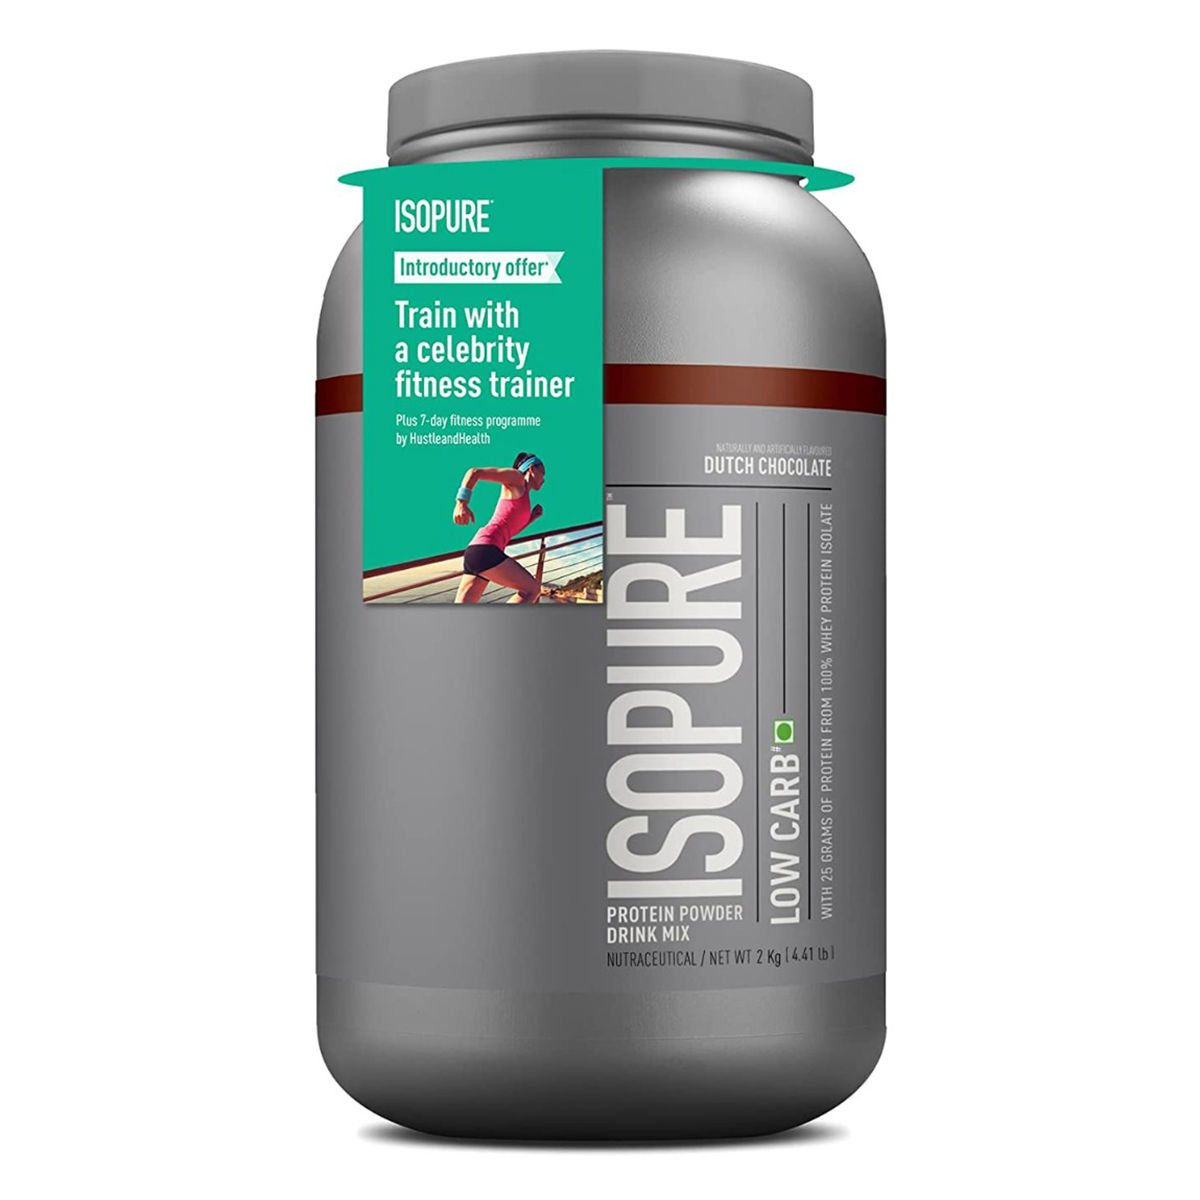 Buy Isopure Low Carb 100% Whey Protein Isolate Dutch Chocolate Flavour Powder, 4.41 lb Online